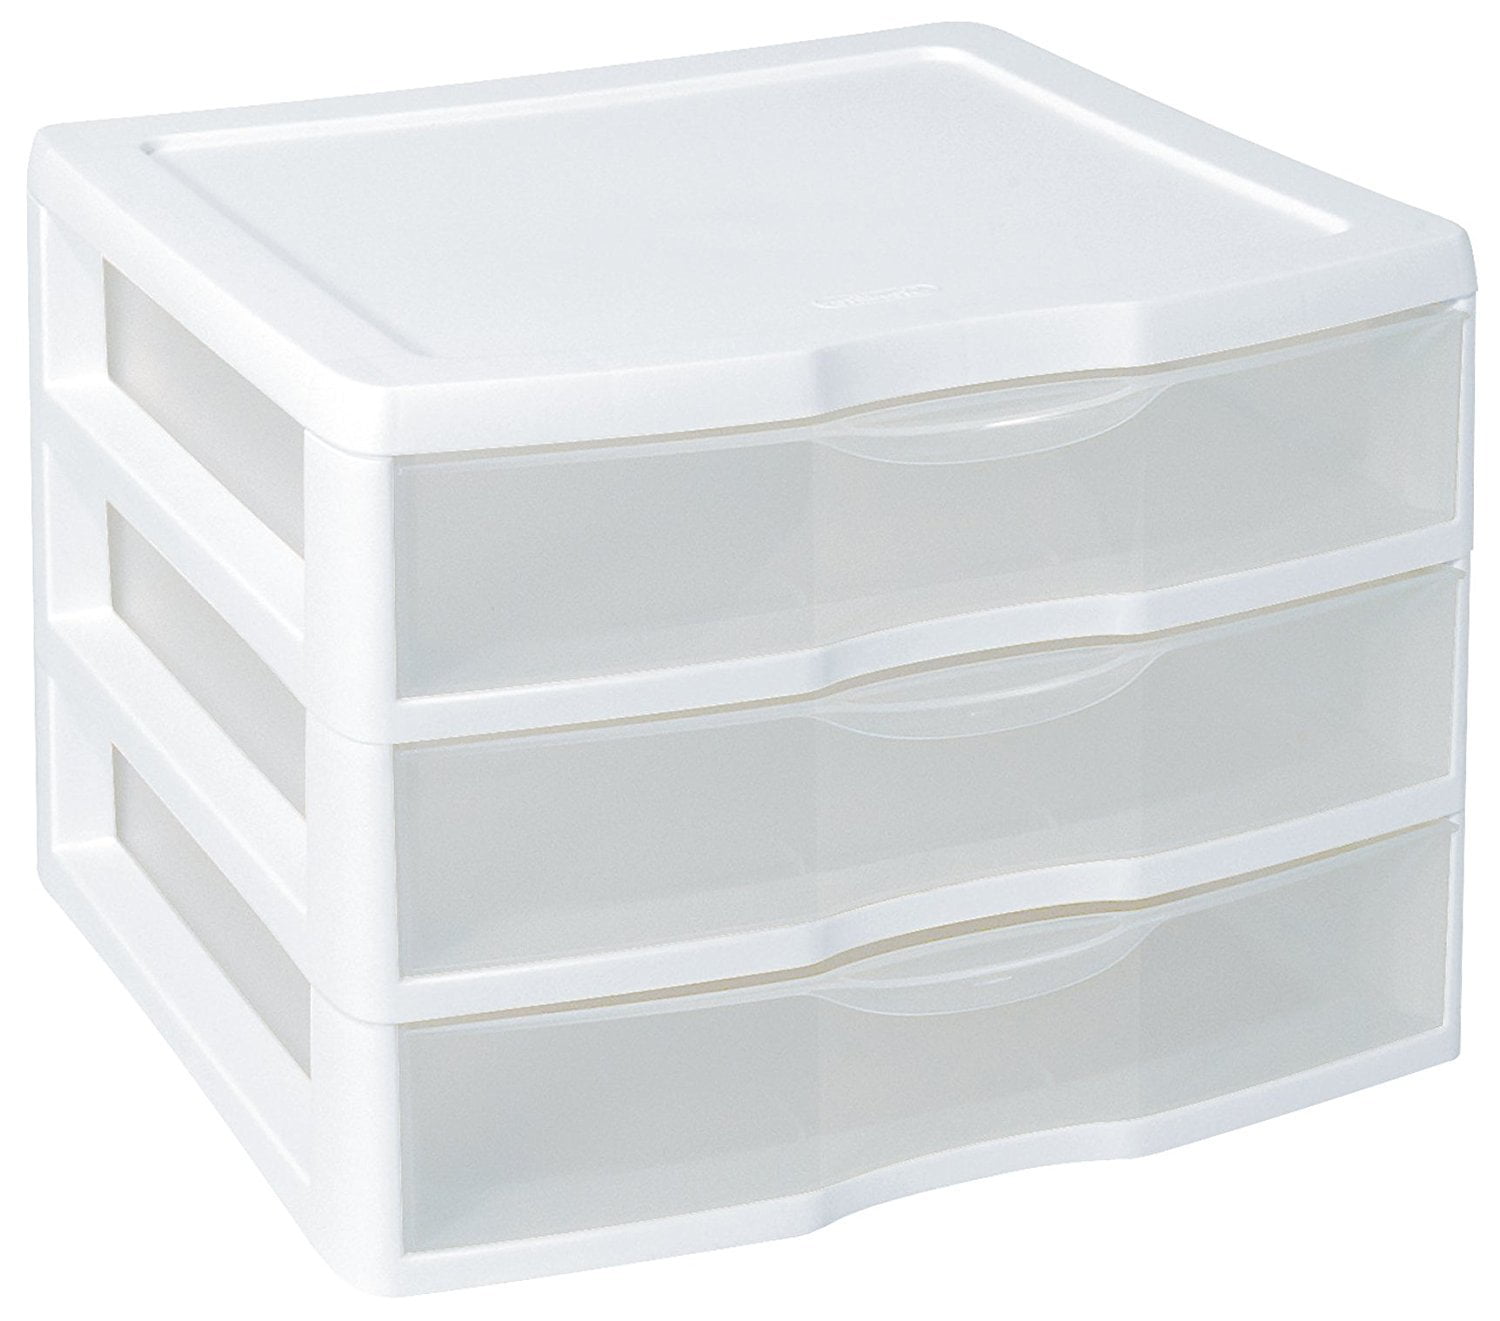 White Frame with Clear Drawers Details about   Sterilite 20738006 Small 3 Drawer Unit 6-Pack 